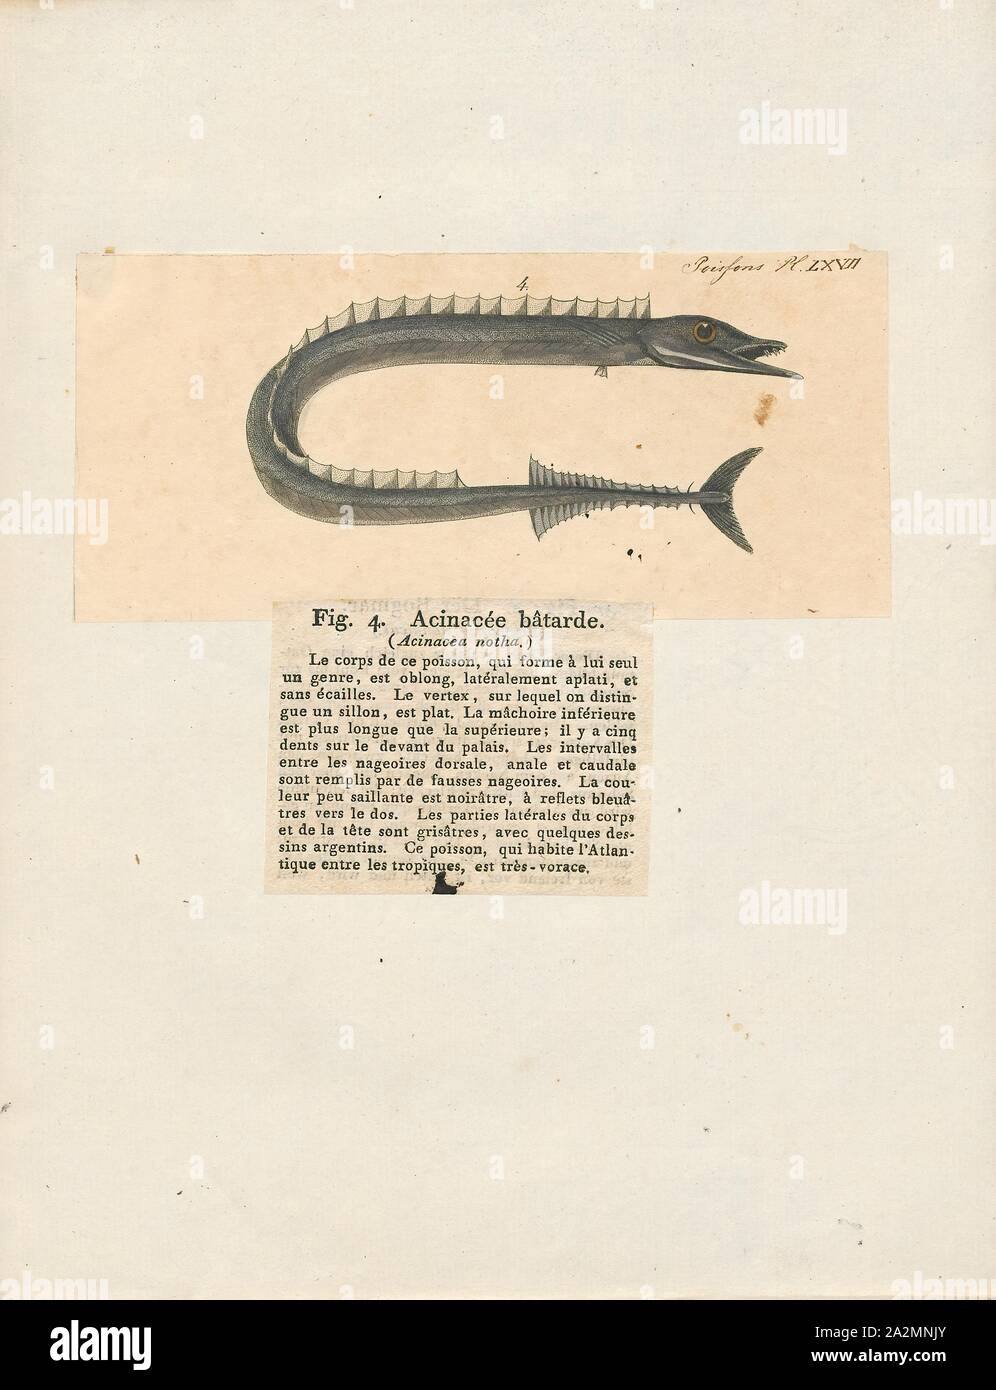 Gempylus serpens, Print, The snake mackerel (Gempylus serpens) is a species of fish in the monotypic genus Gempylus, belonging to the family Gempylidae (which is also referred to generally as 'snake mackerels'). It is found worldwide in tropical and subtropical oceans between the latitudes of 42° N and 40° S; adults are known to stray into temperate waters. It is found to a depth of 600 meters (2, 000 feet). Populations of the snake mackerel from the Atlantic and the Indo-Pacific differ in vertebral count (51–55 versus 48–50) and number of first dorsal fin spines (30–32 versus 26–30), and so Stock Photo